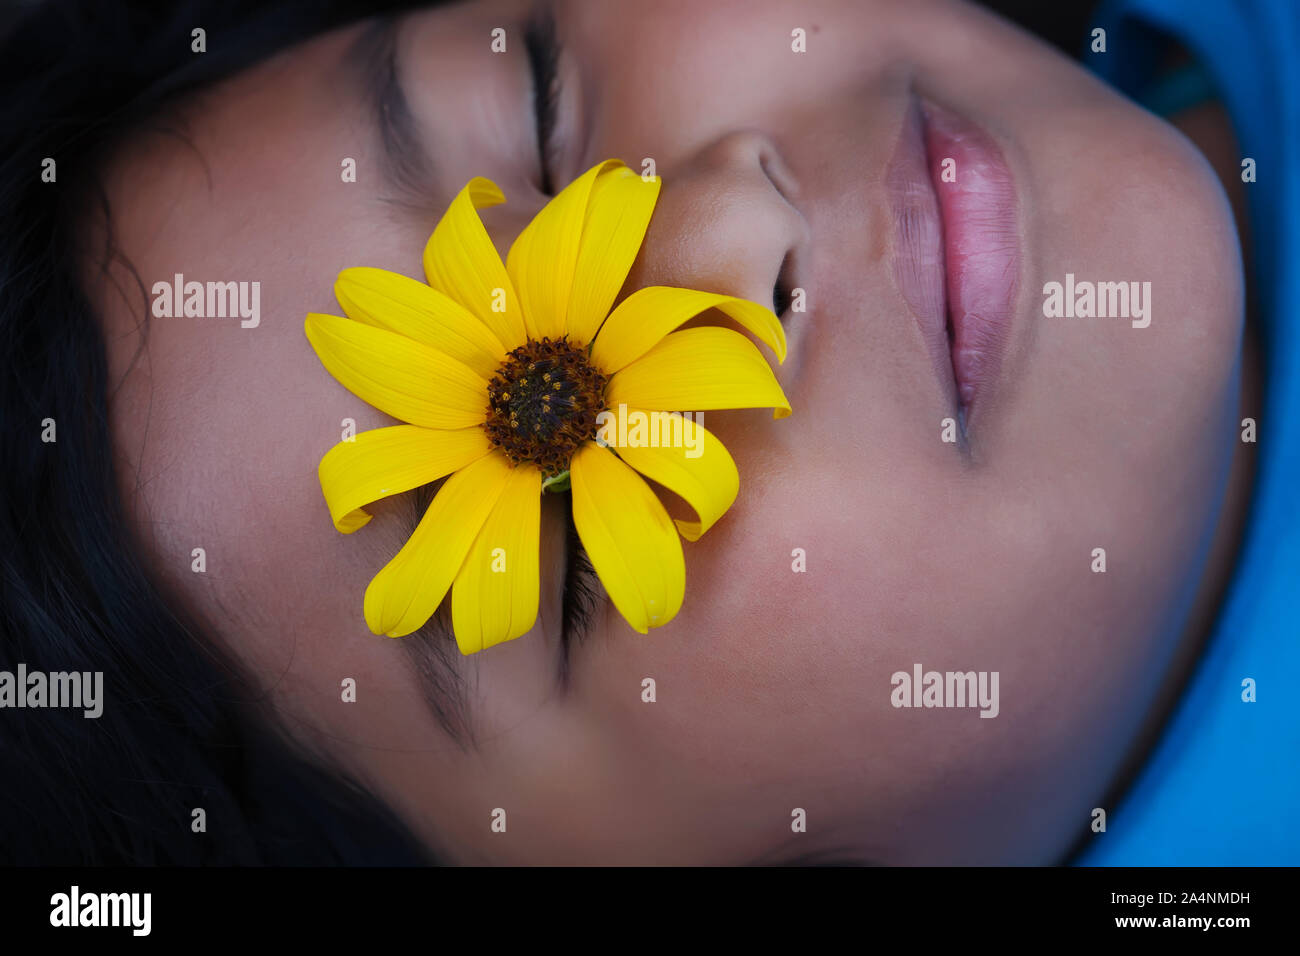 A young girl with a yellow California native flower resting on her eye while she meditates. Stock Photo